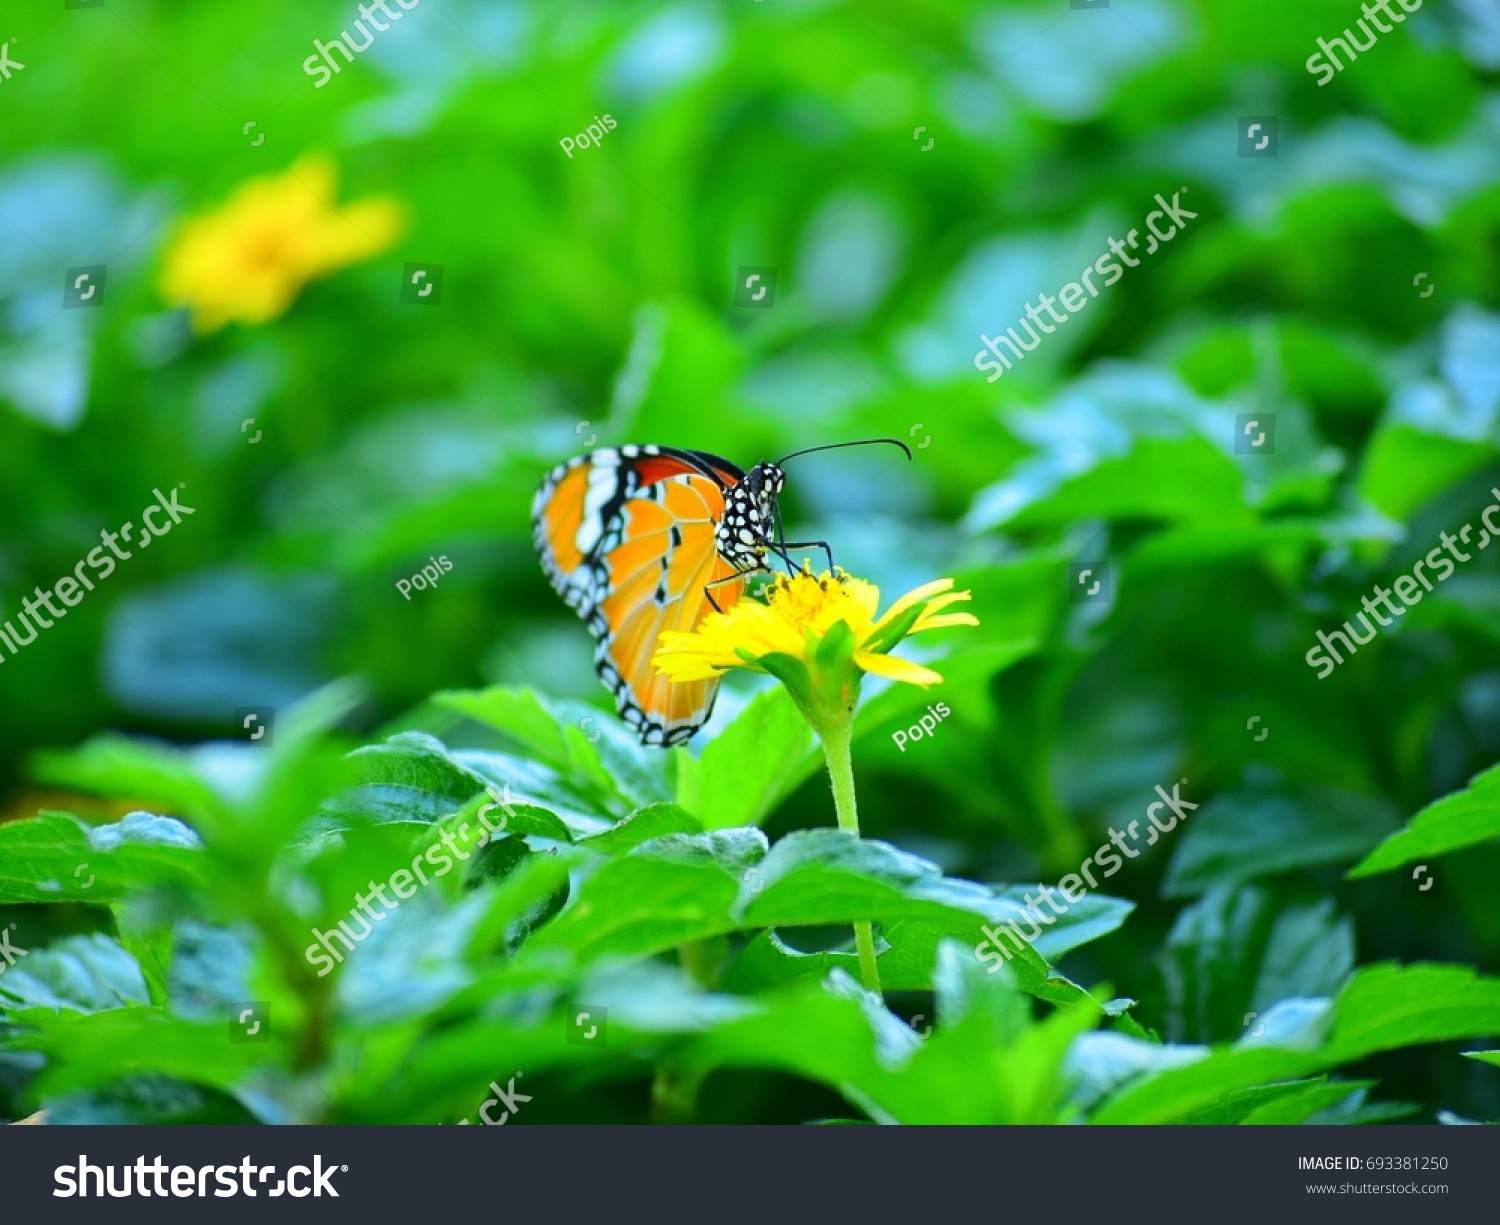 Orange butterfly on yellow flowers, background  green leaves in the park #693381250